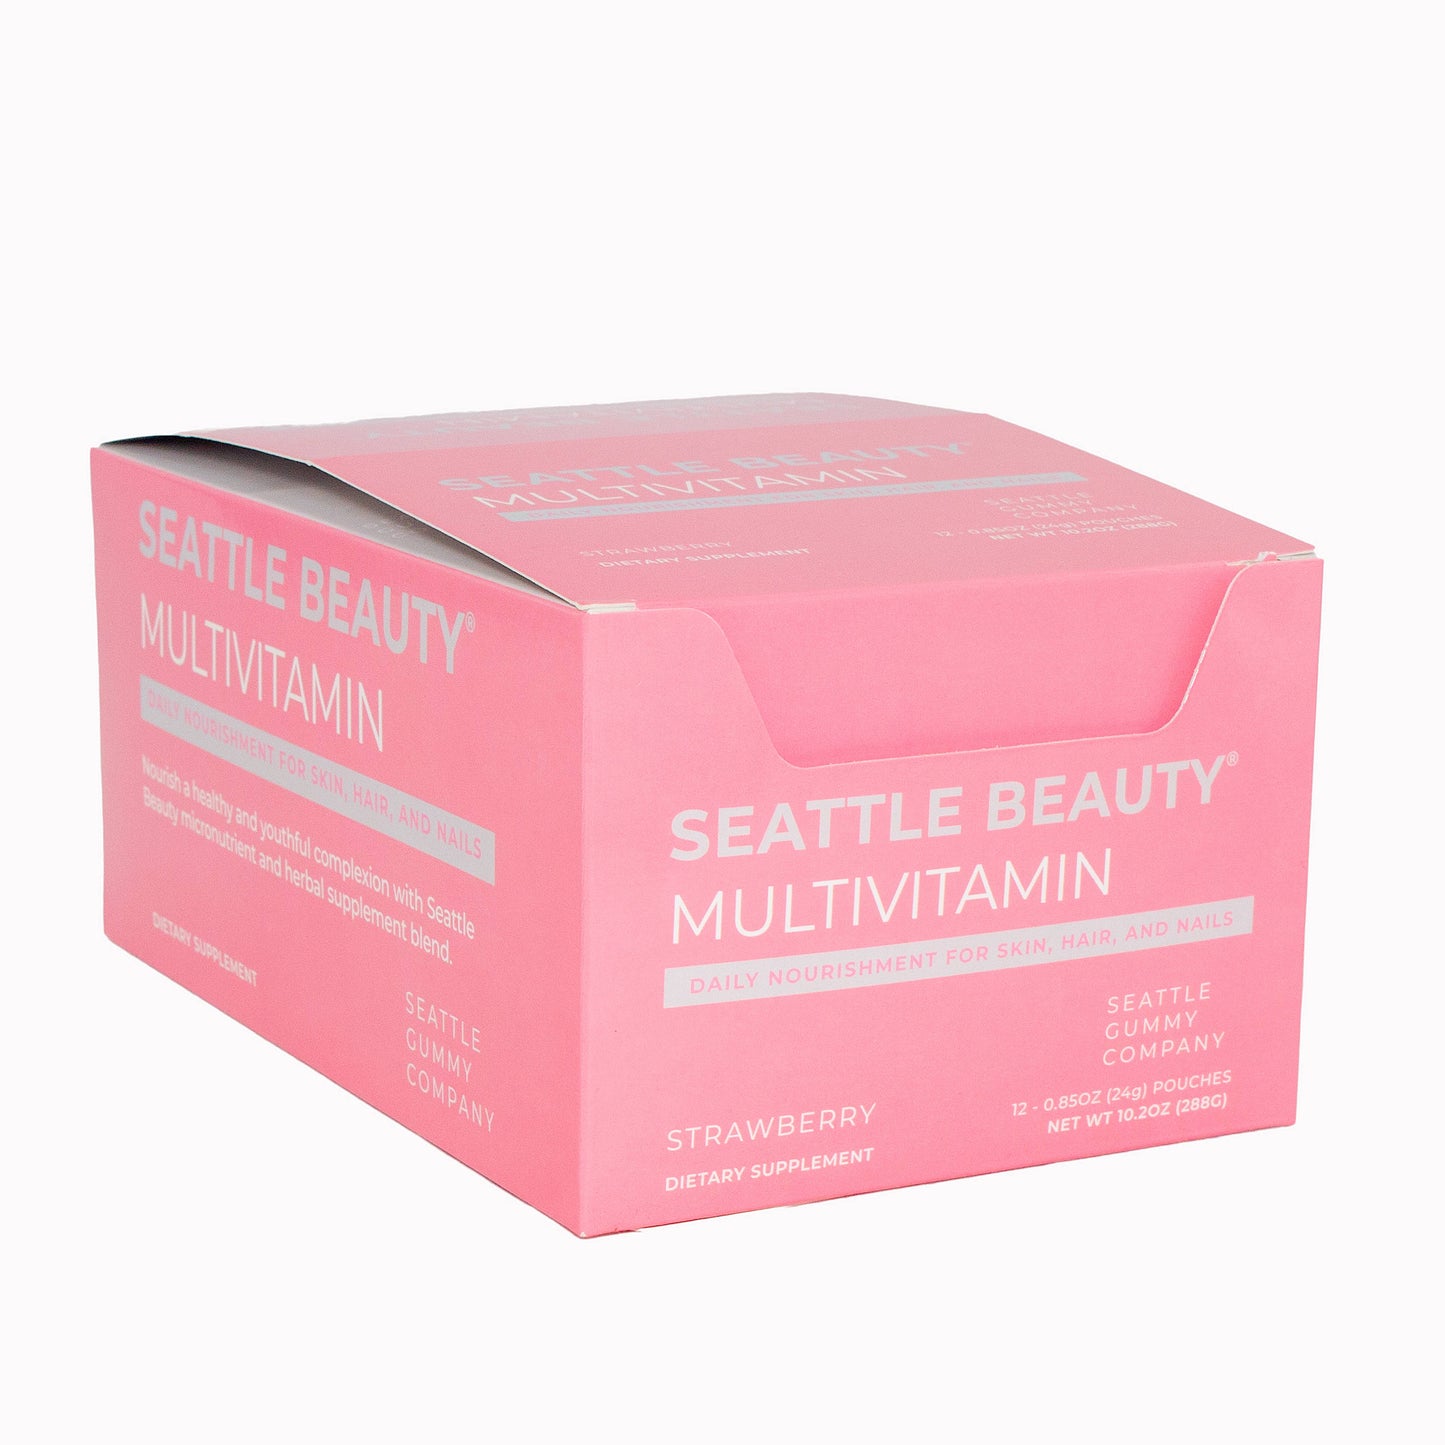 Beauty Gummy Multivitamin with Angelica |12-pack,Strawberry